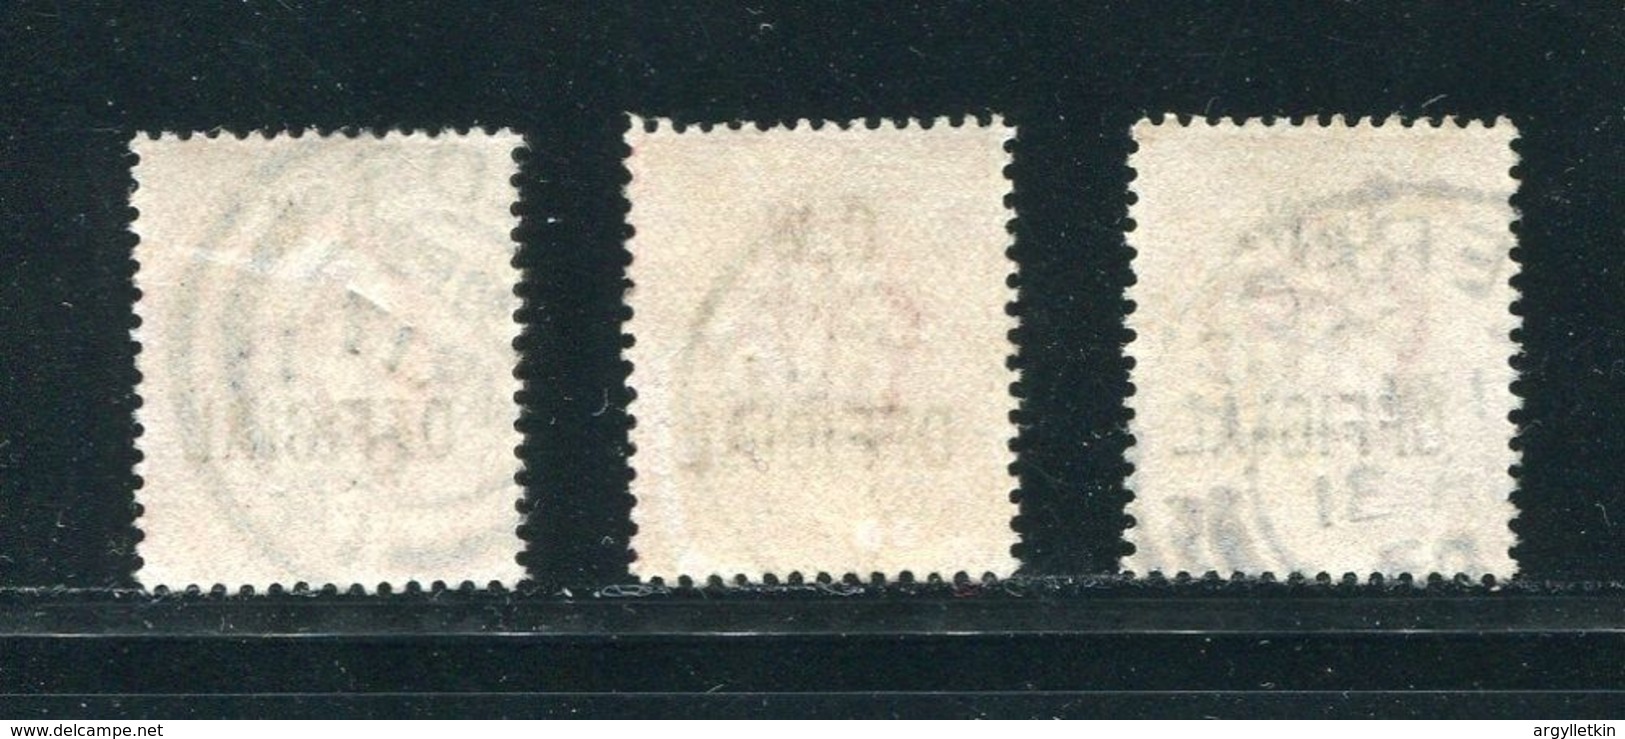 GB KING EDWARD 7TH OFFICIAL STAMPS O.W. OFFICIAL LEEDS LIVERPOOL - Non Classificati